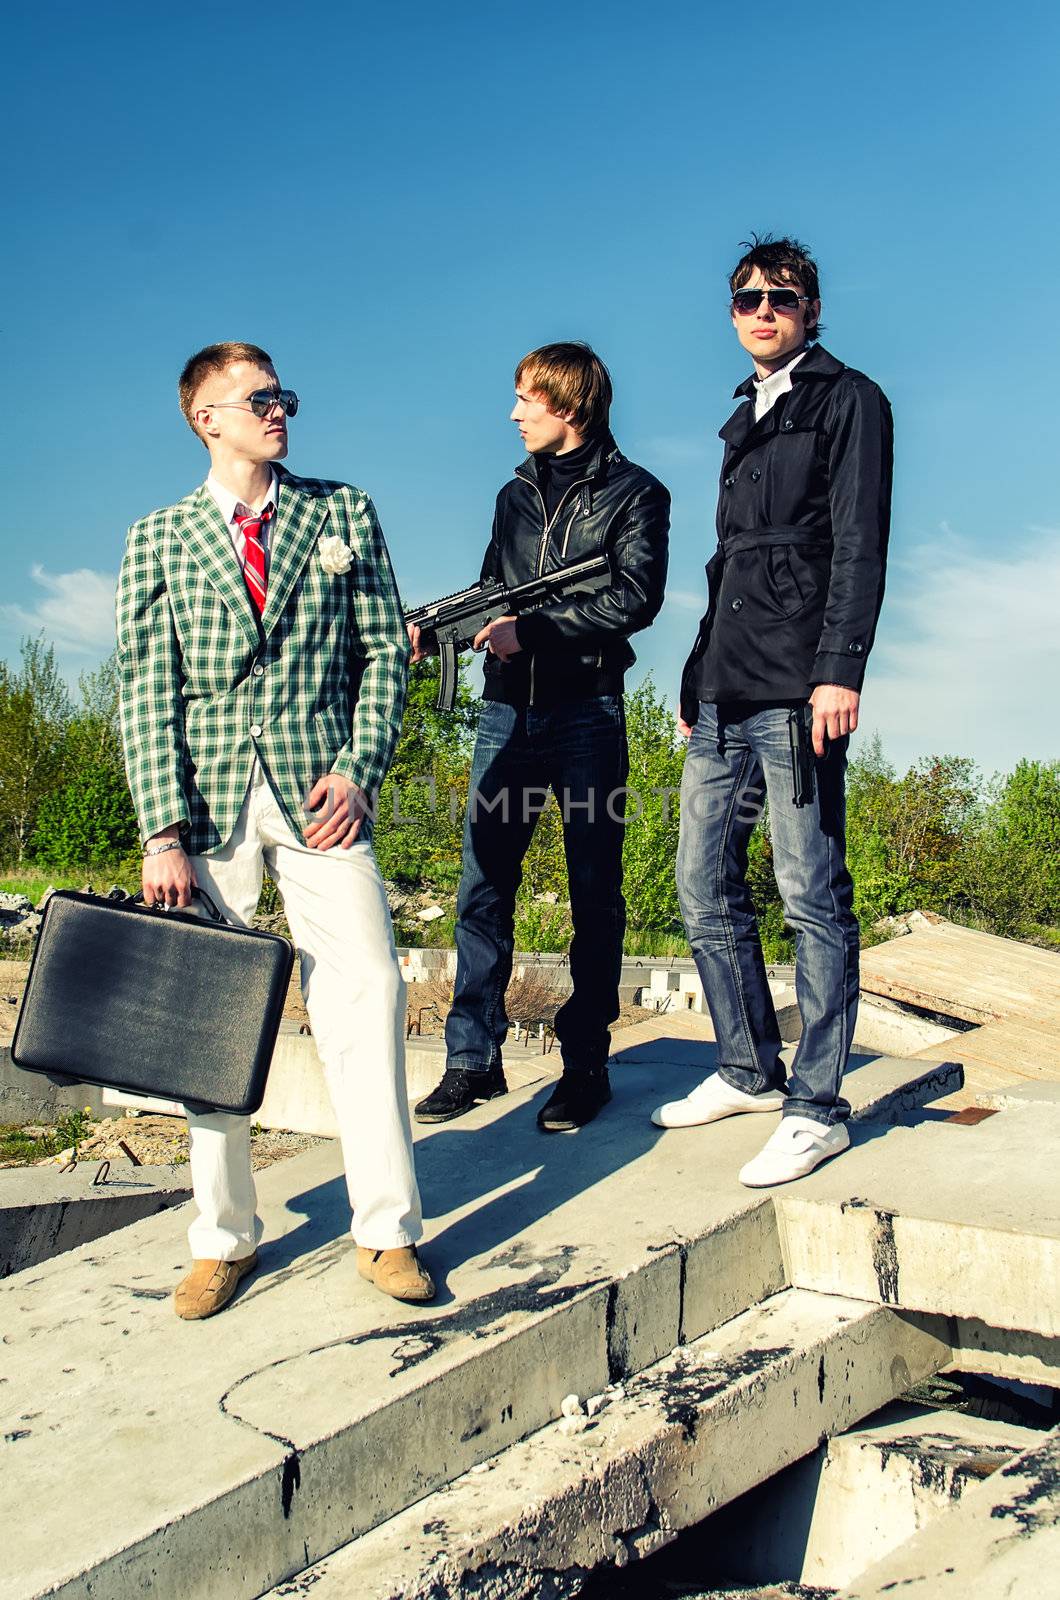 Mafia: Three thugs with a suitcase and weapons